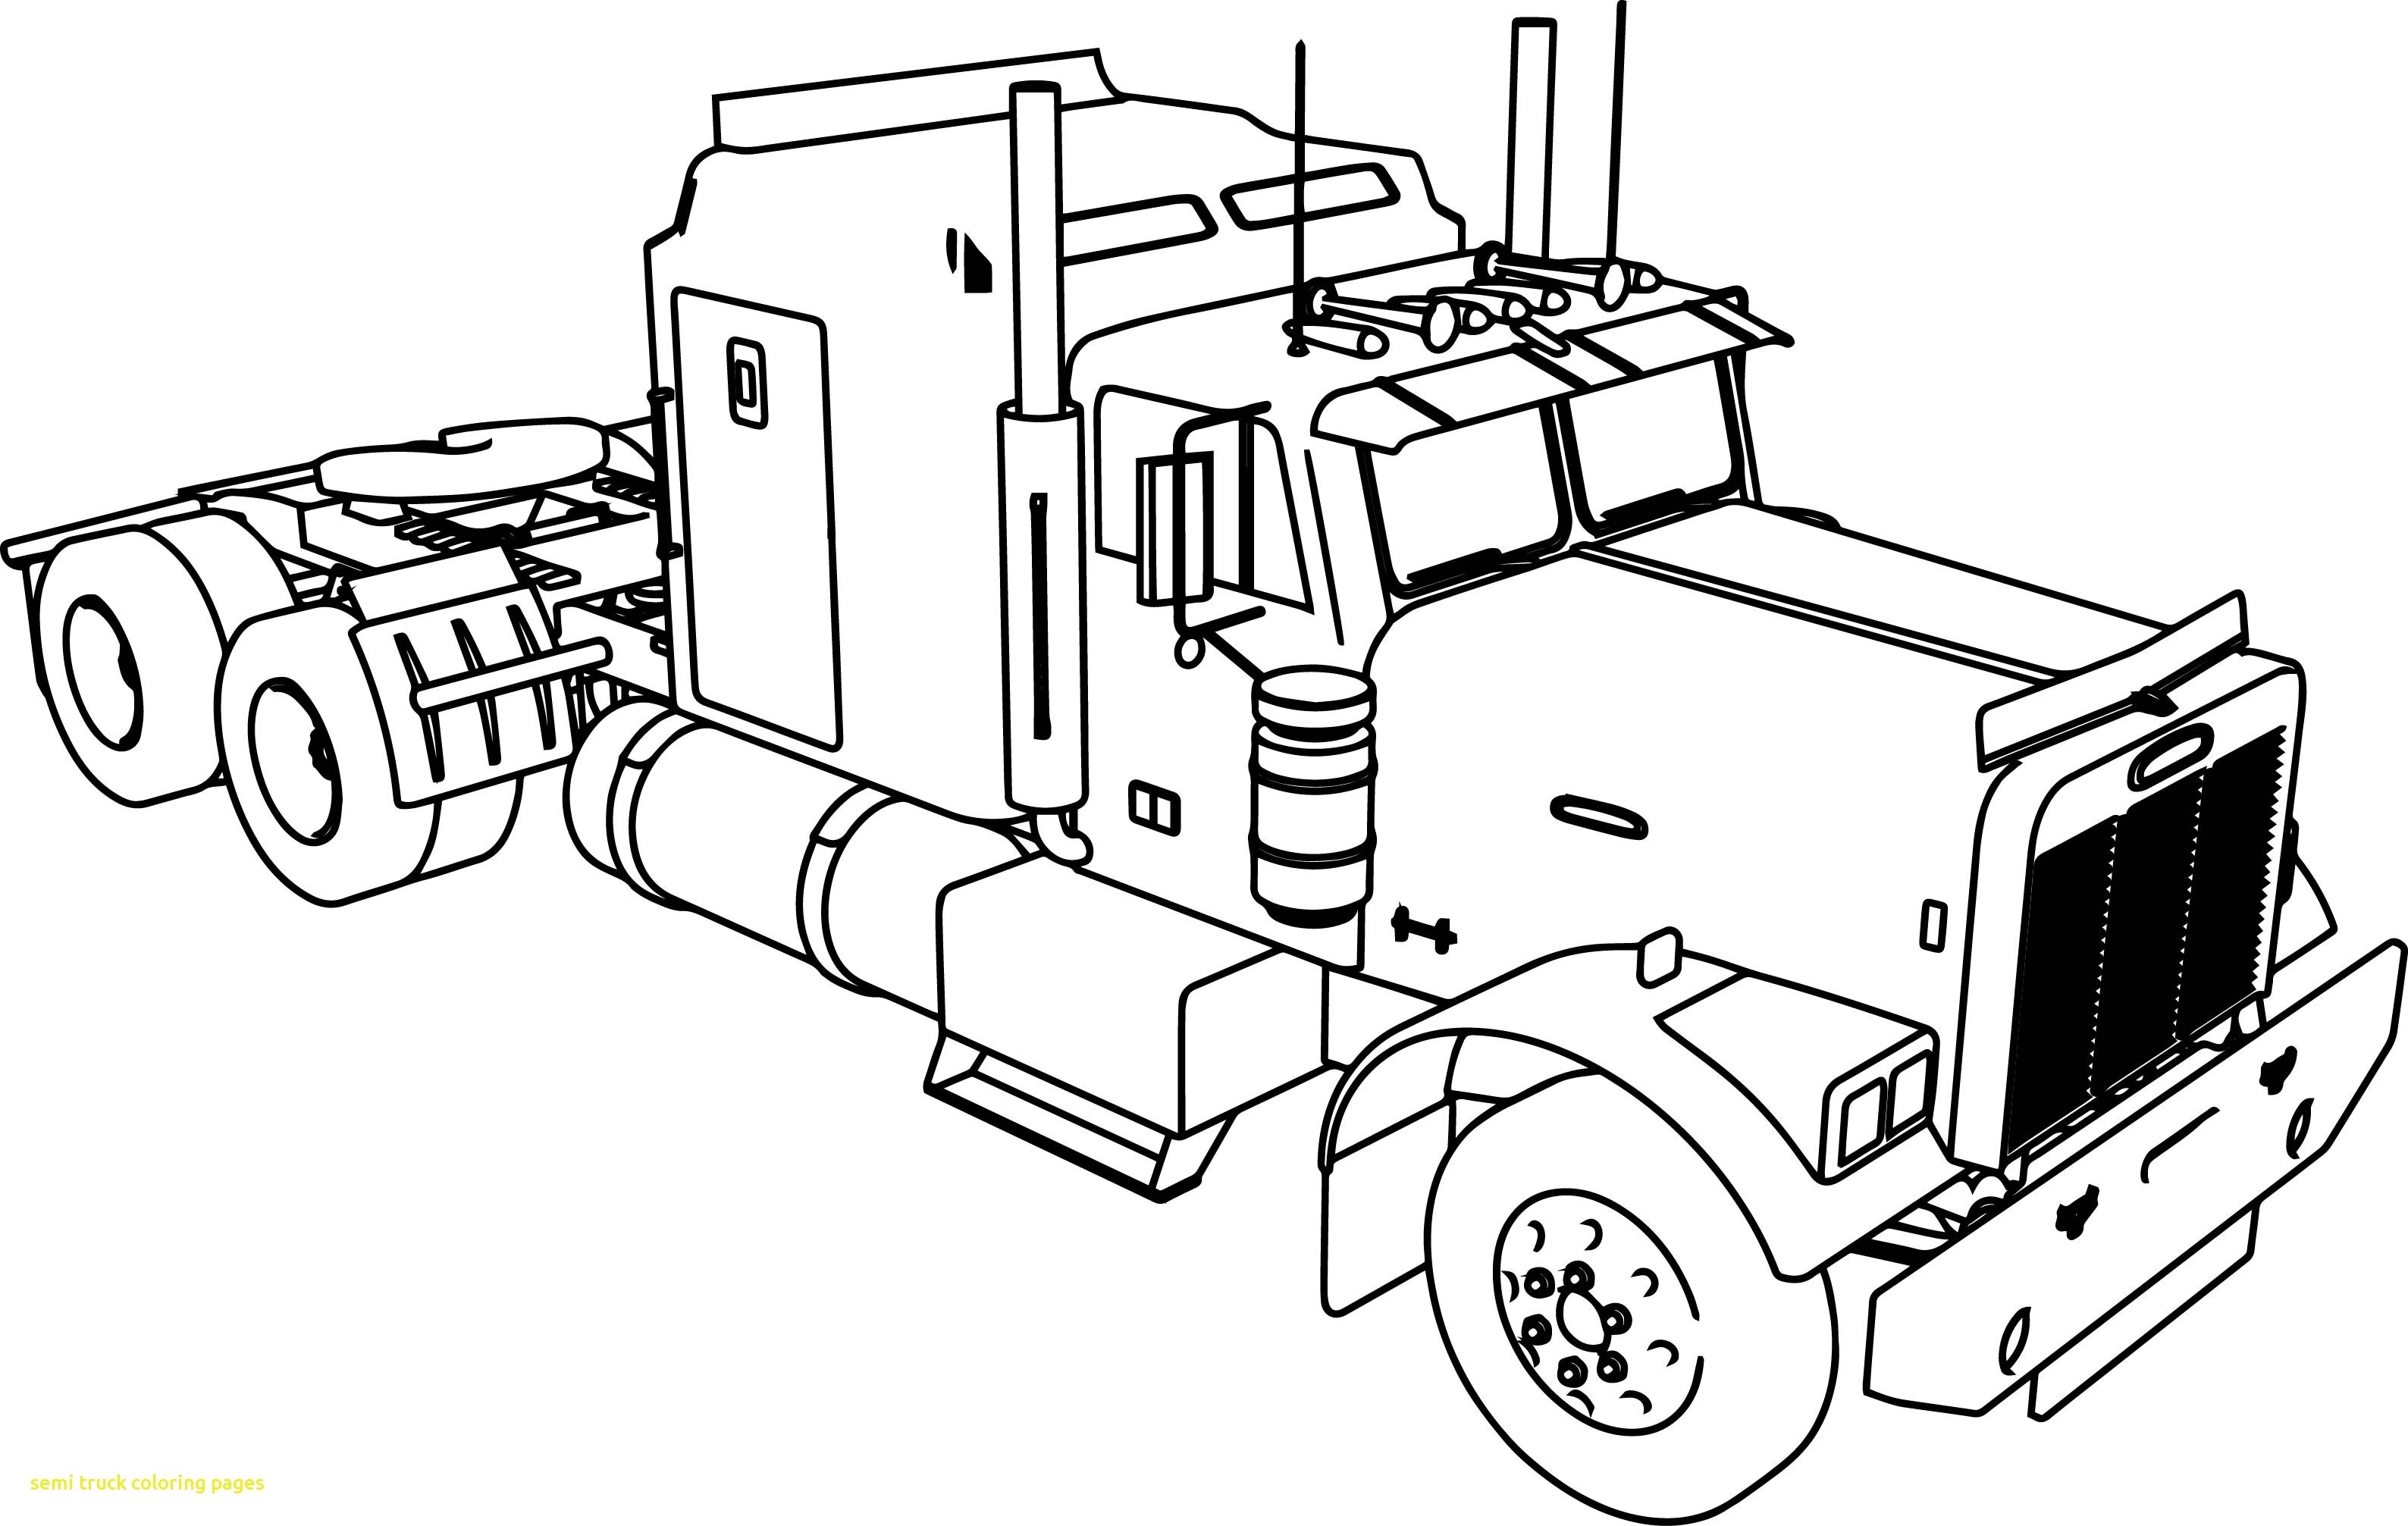 Mail Truck Coloring Page at GetColoringscom Free